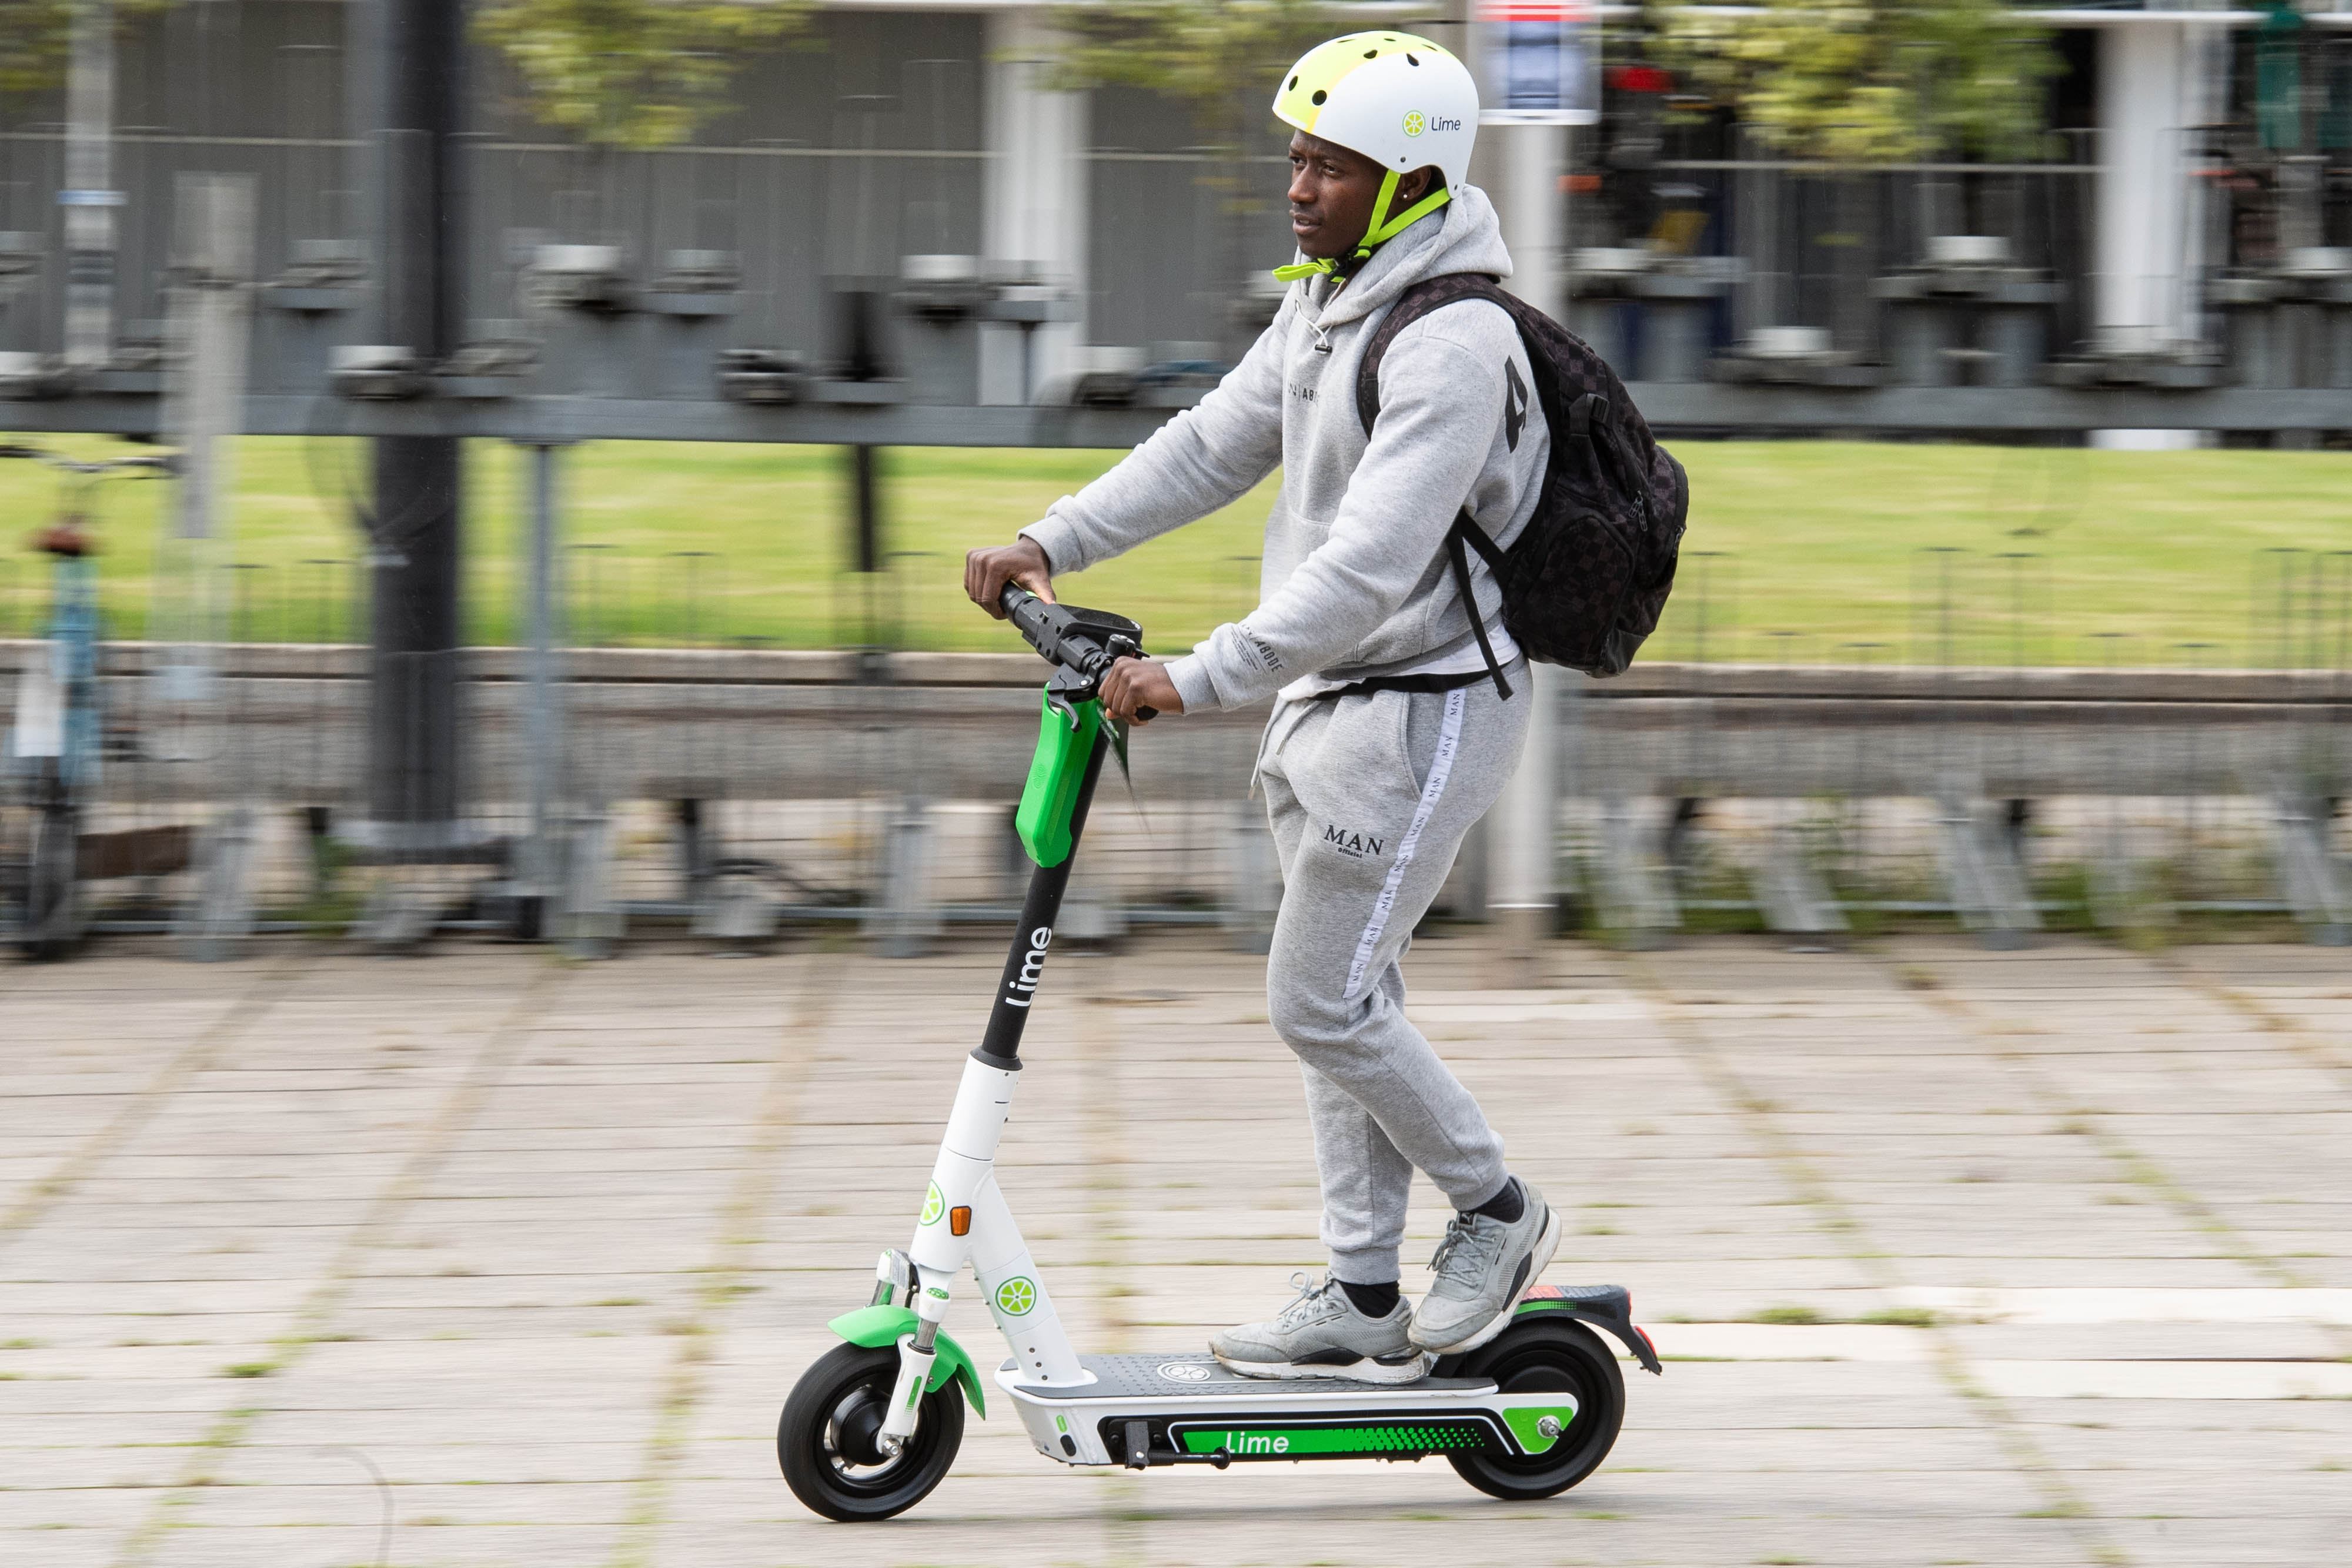 london-s-e-scooter-trial-will-be-as-safe-as-possible-firm-says